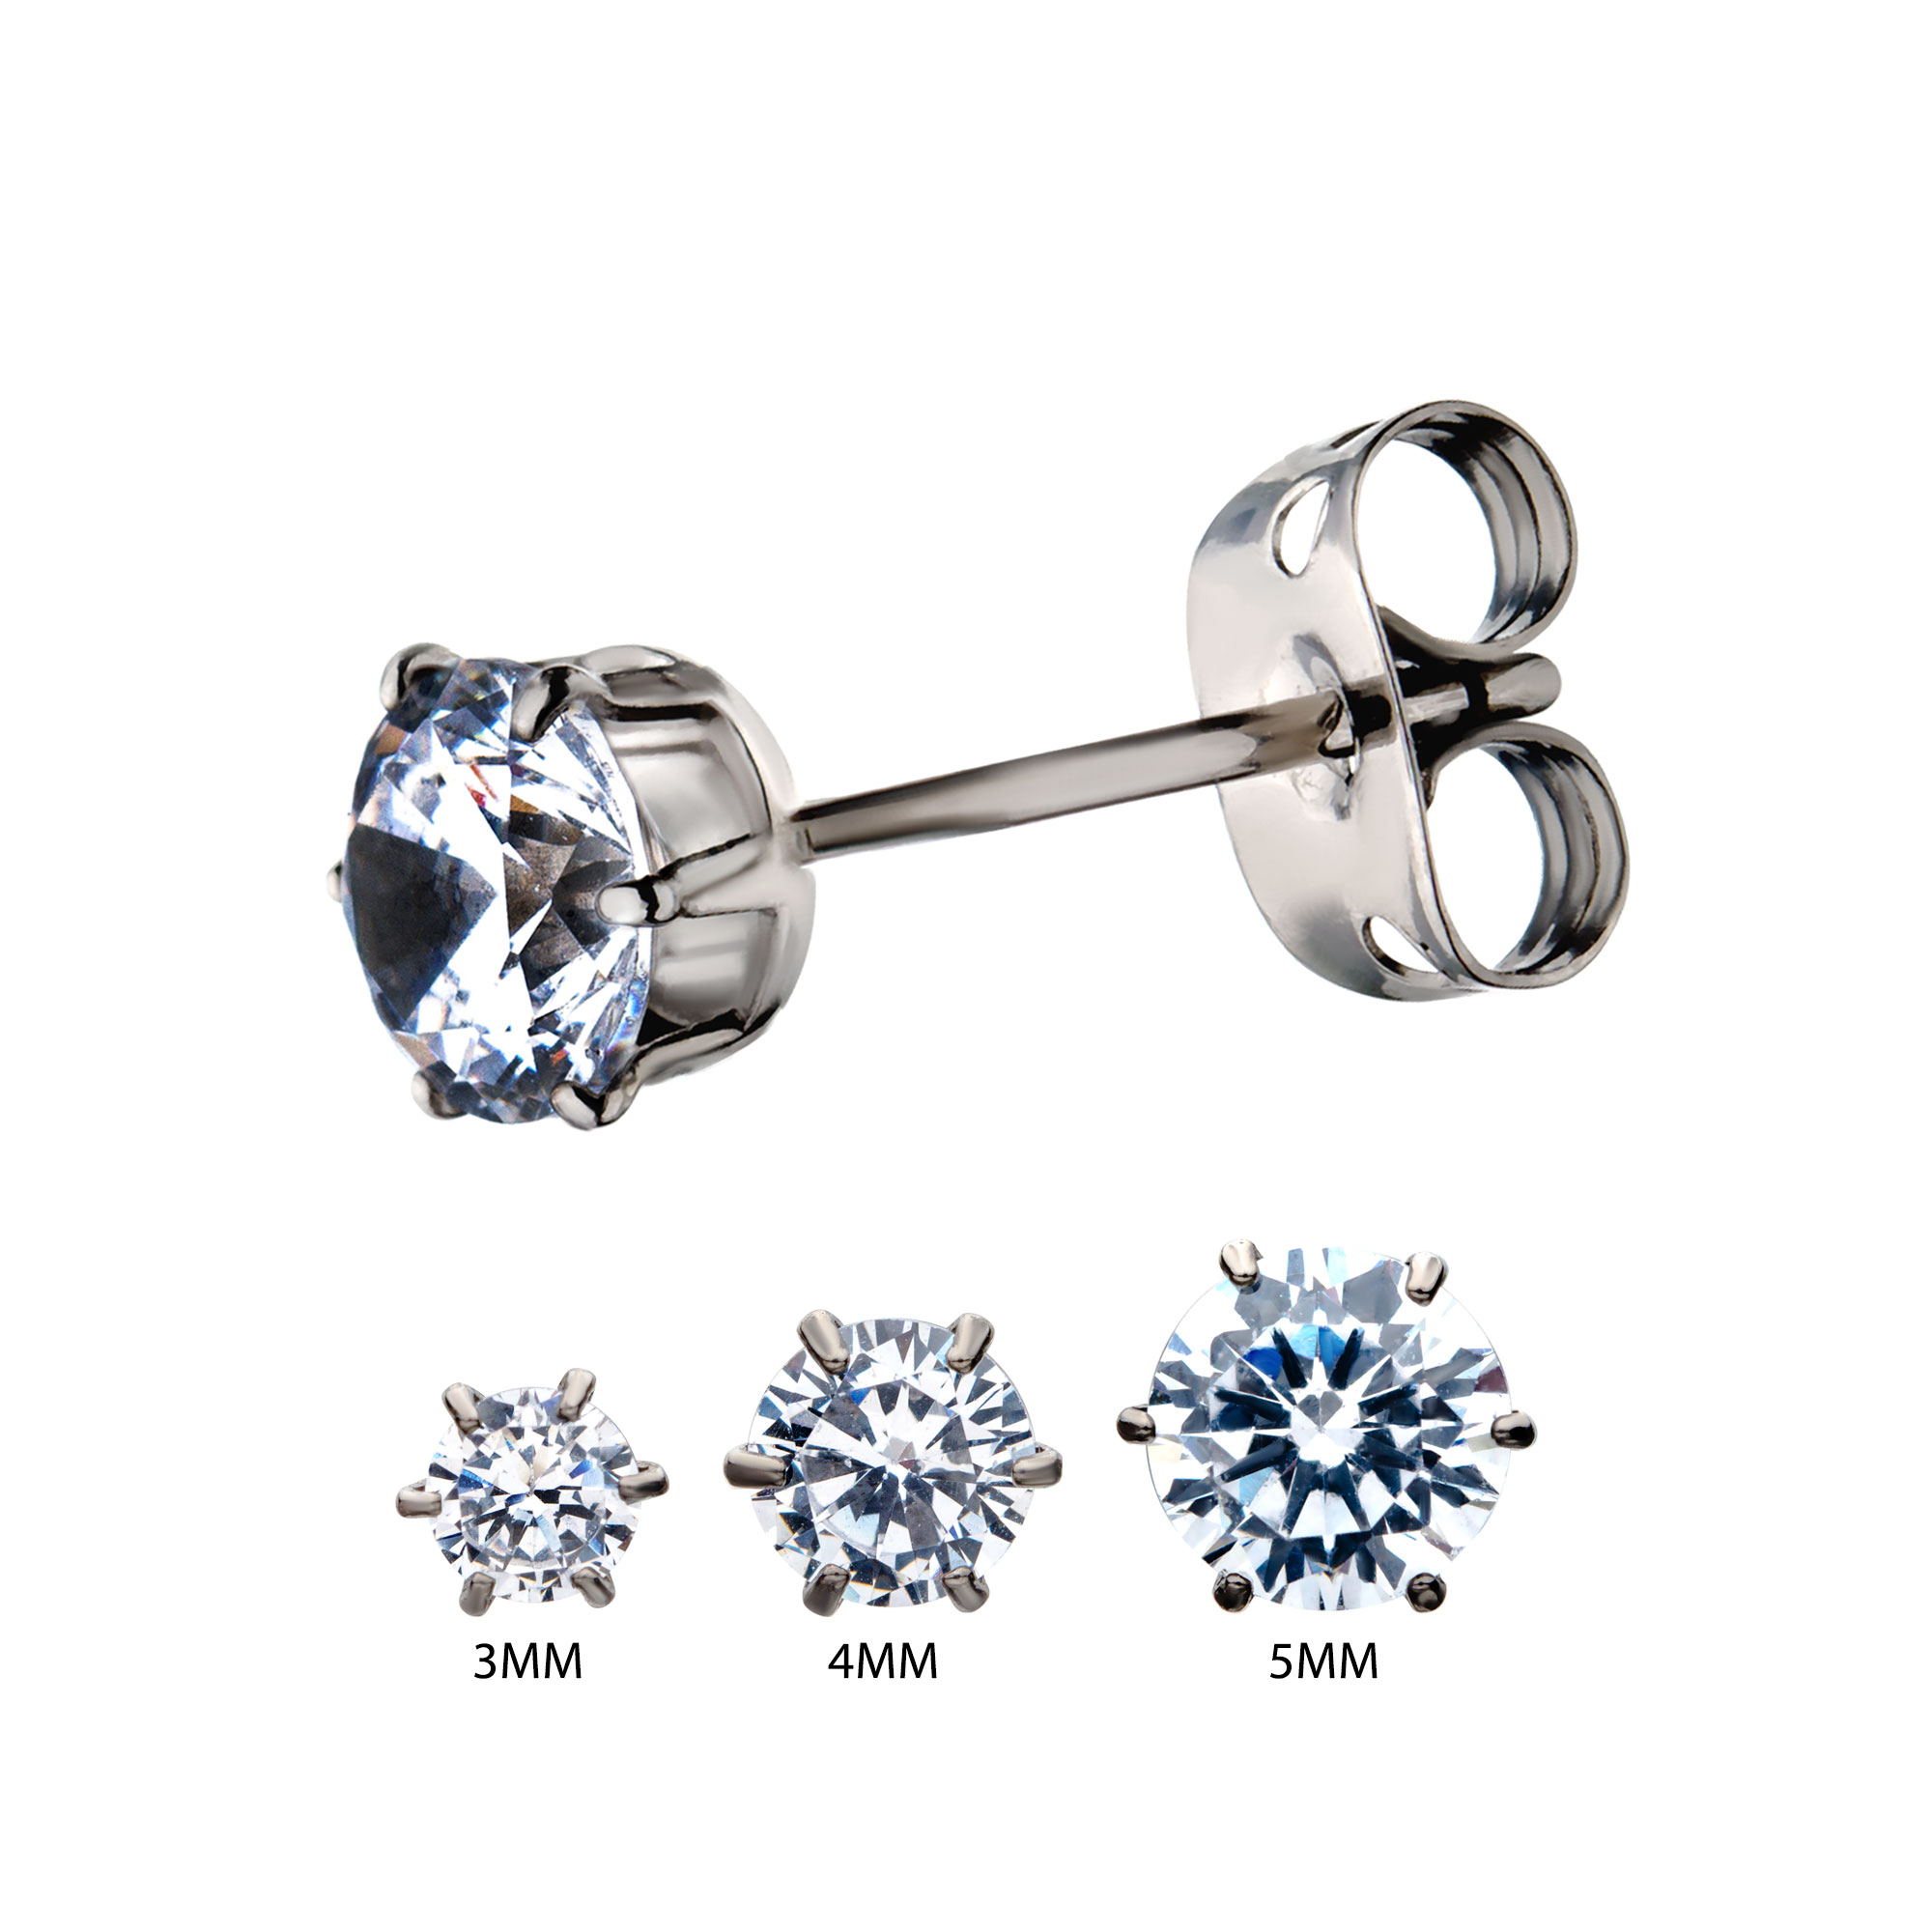 20g Titanium Post and Butterfly Back with Prong Set CZ Stud Earrings Enchanted Jewelry Plainfield, CT